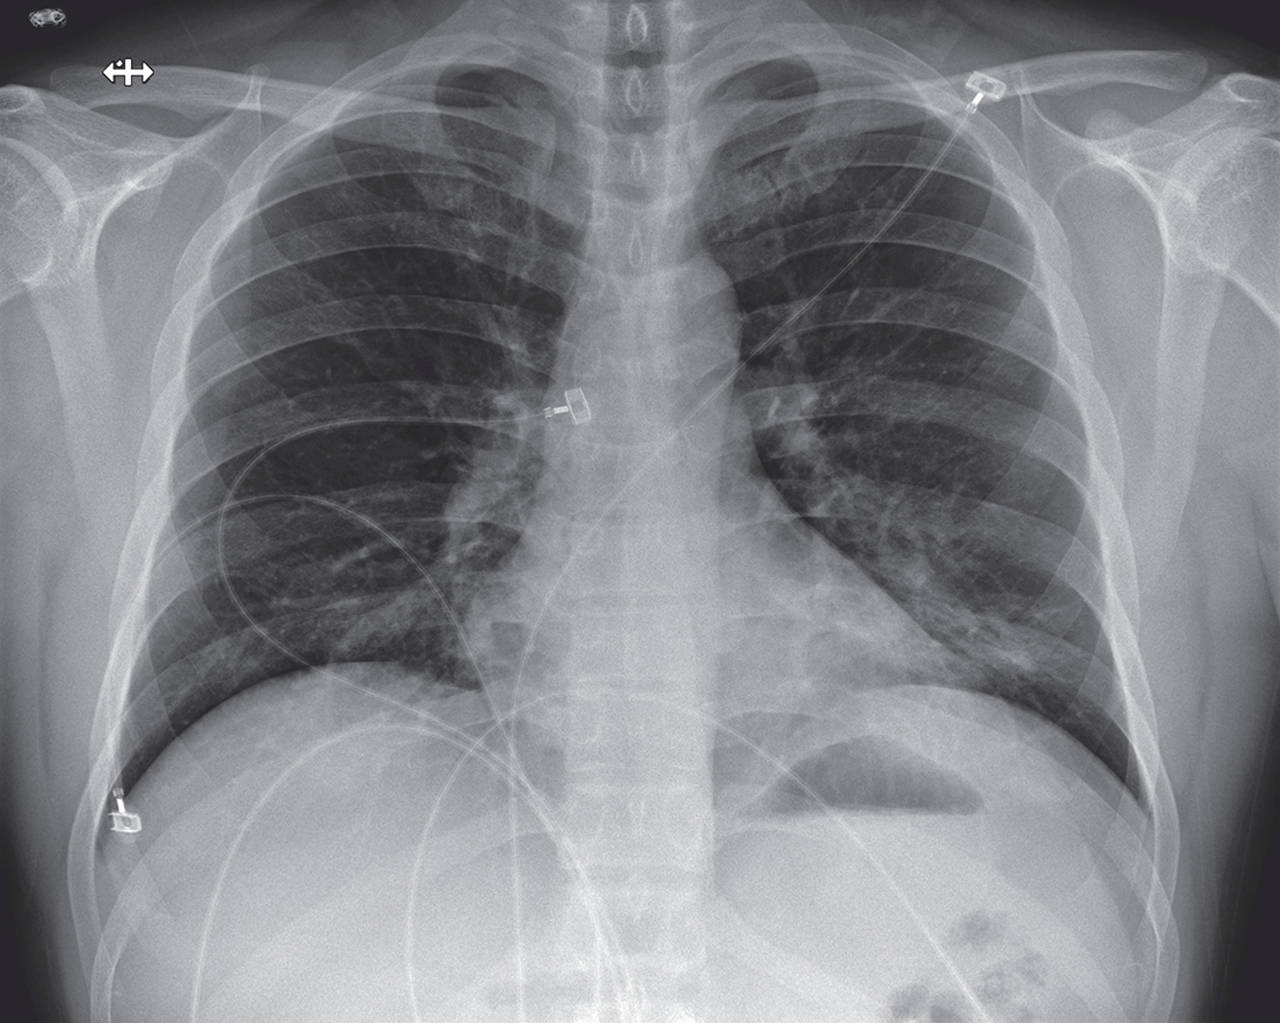 Posteroanterior Chest Radiograph, Jan. 24, 2020 (Illness Day 9, Hospital Day 5). Increasing left basilar opacity was visible, arousing concern about pneumonia. (Snohomish Health District)